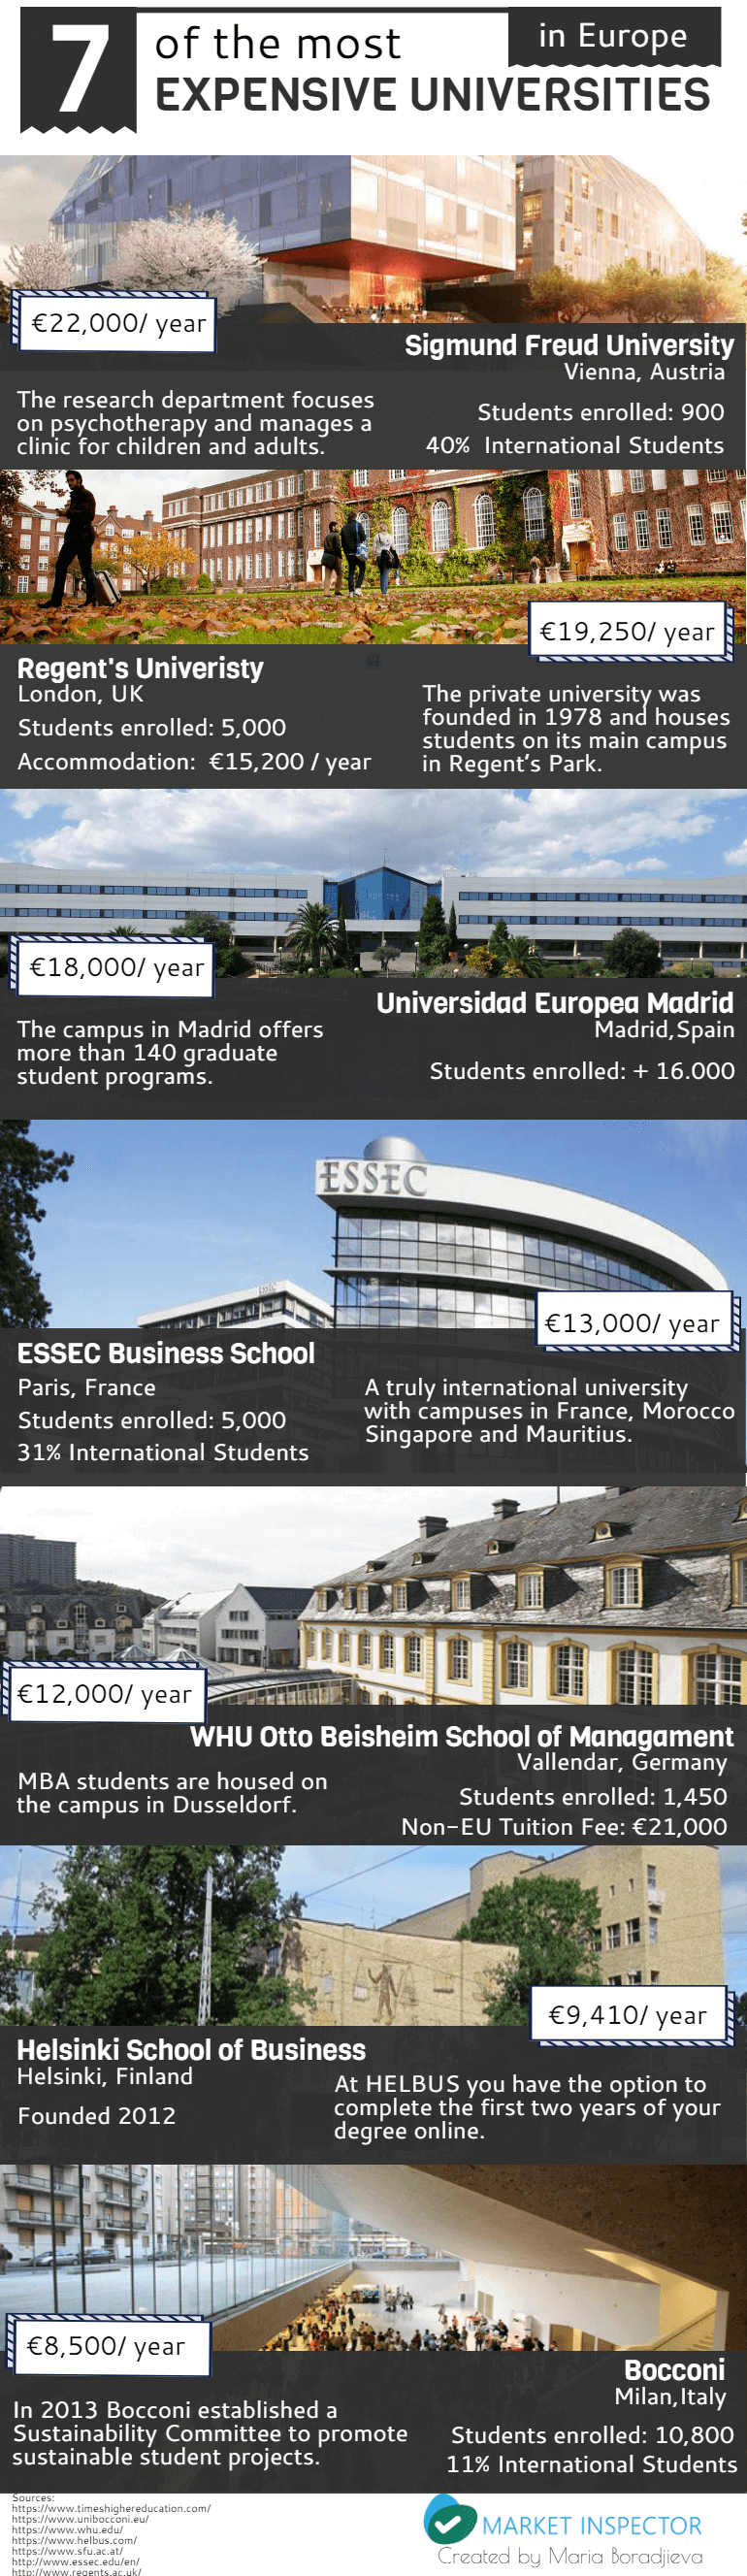 The Most Expensive Universities In Europe